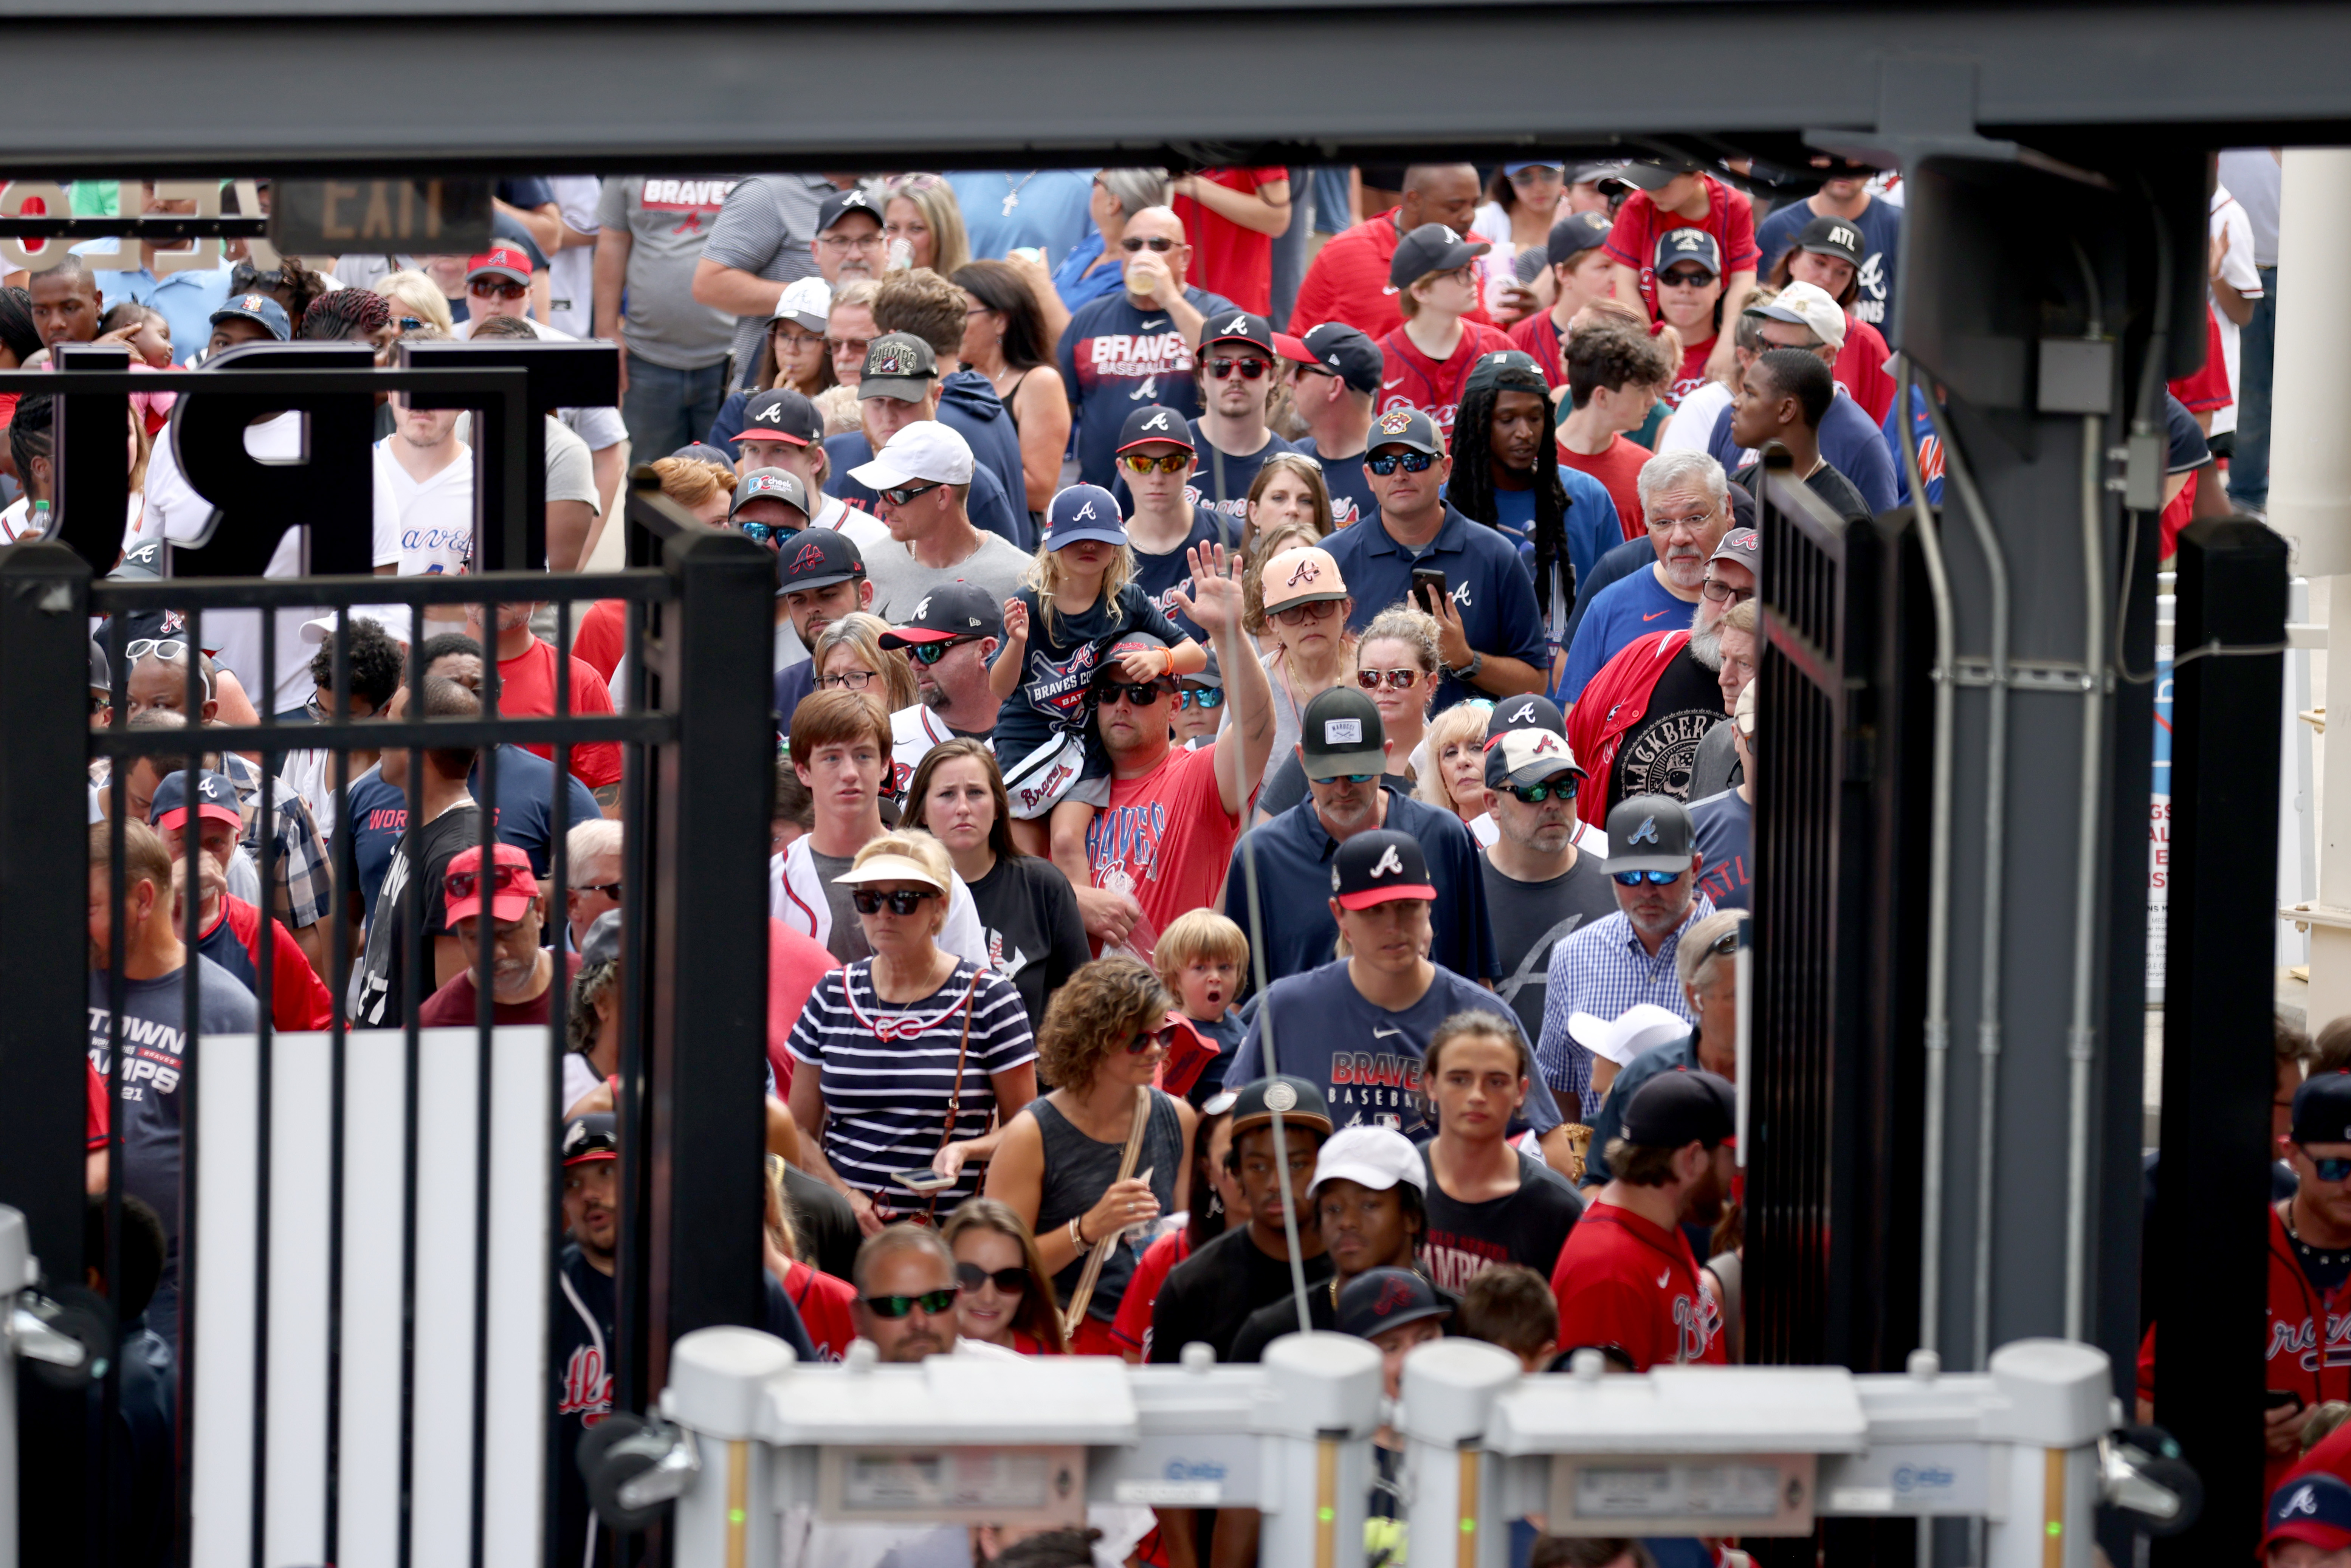 What Braves execs told investors about attendance, streaming, ownership